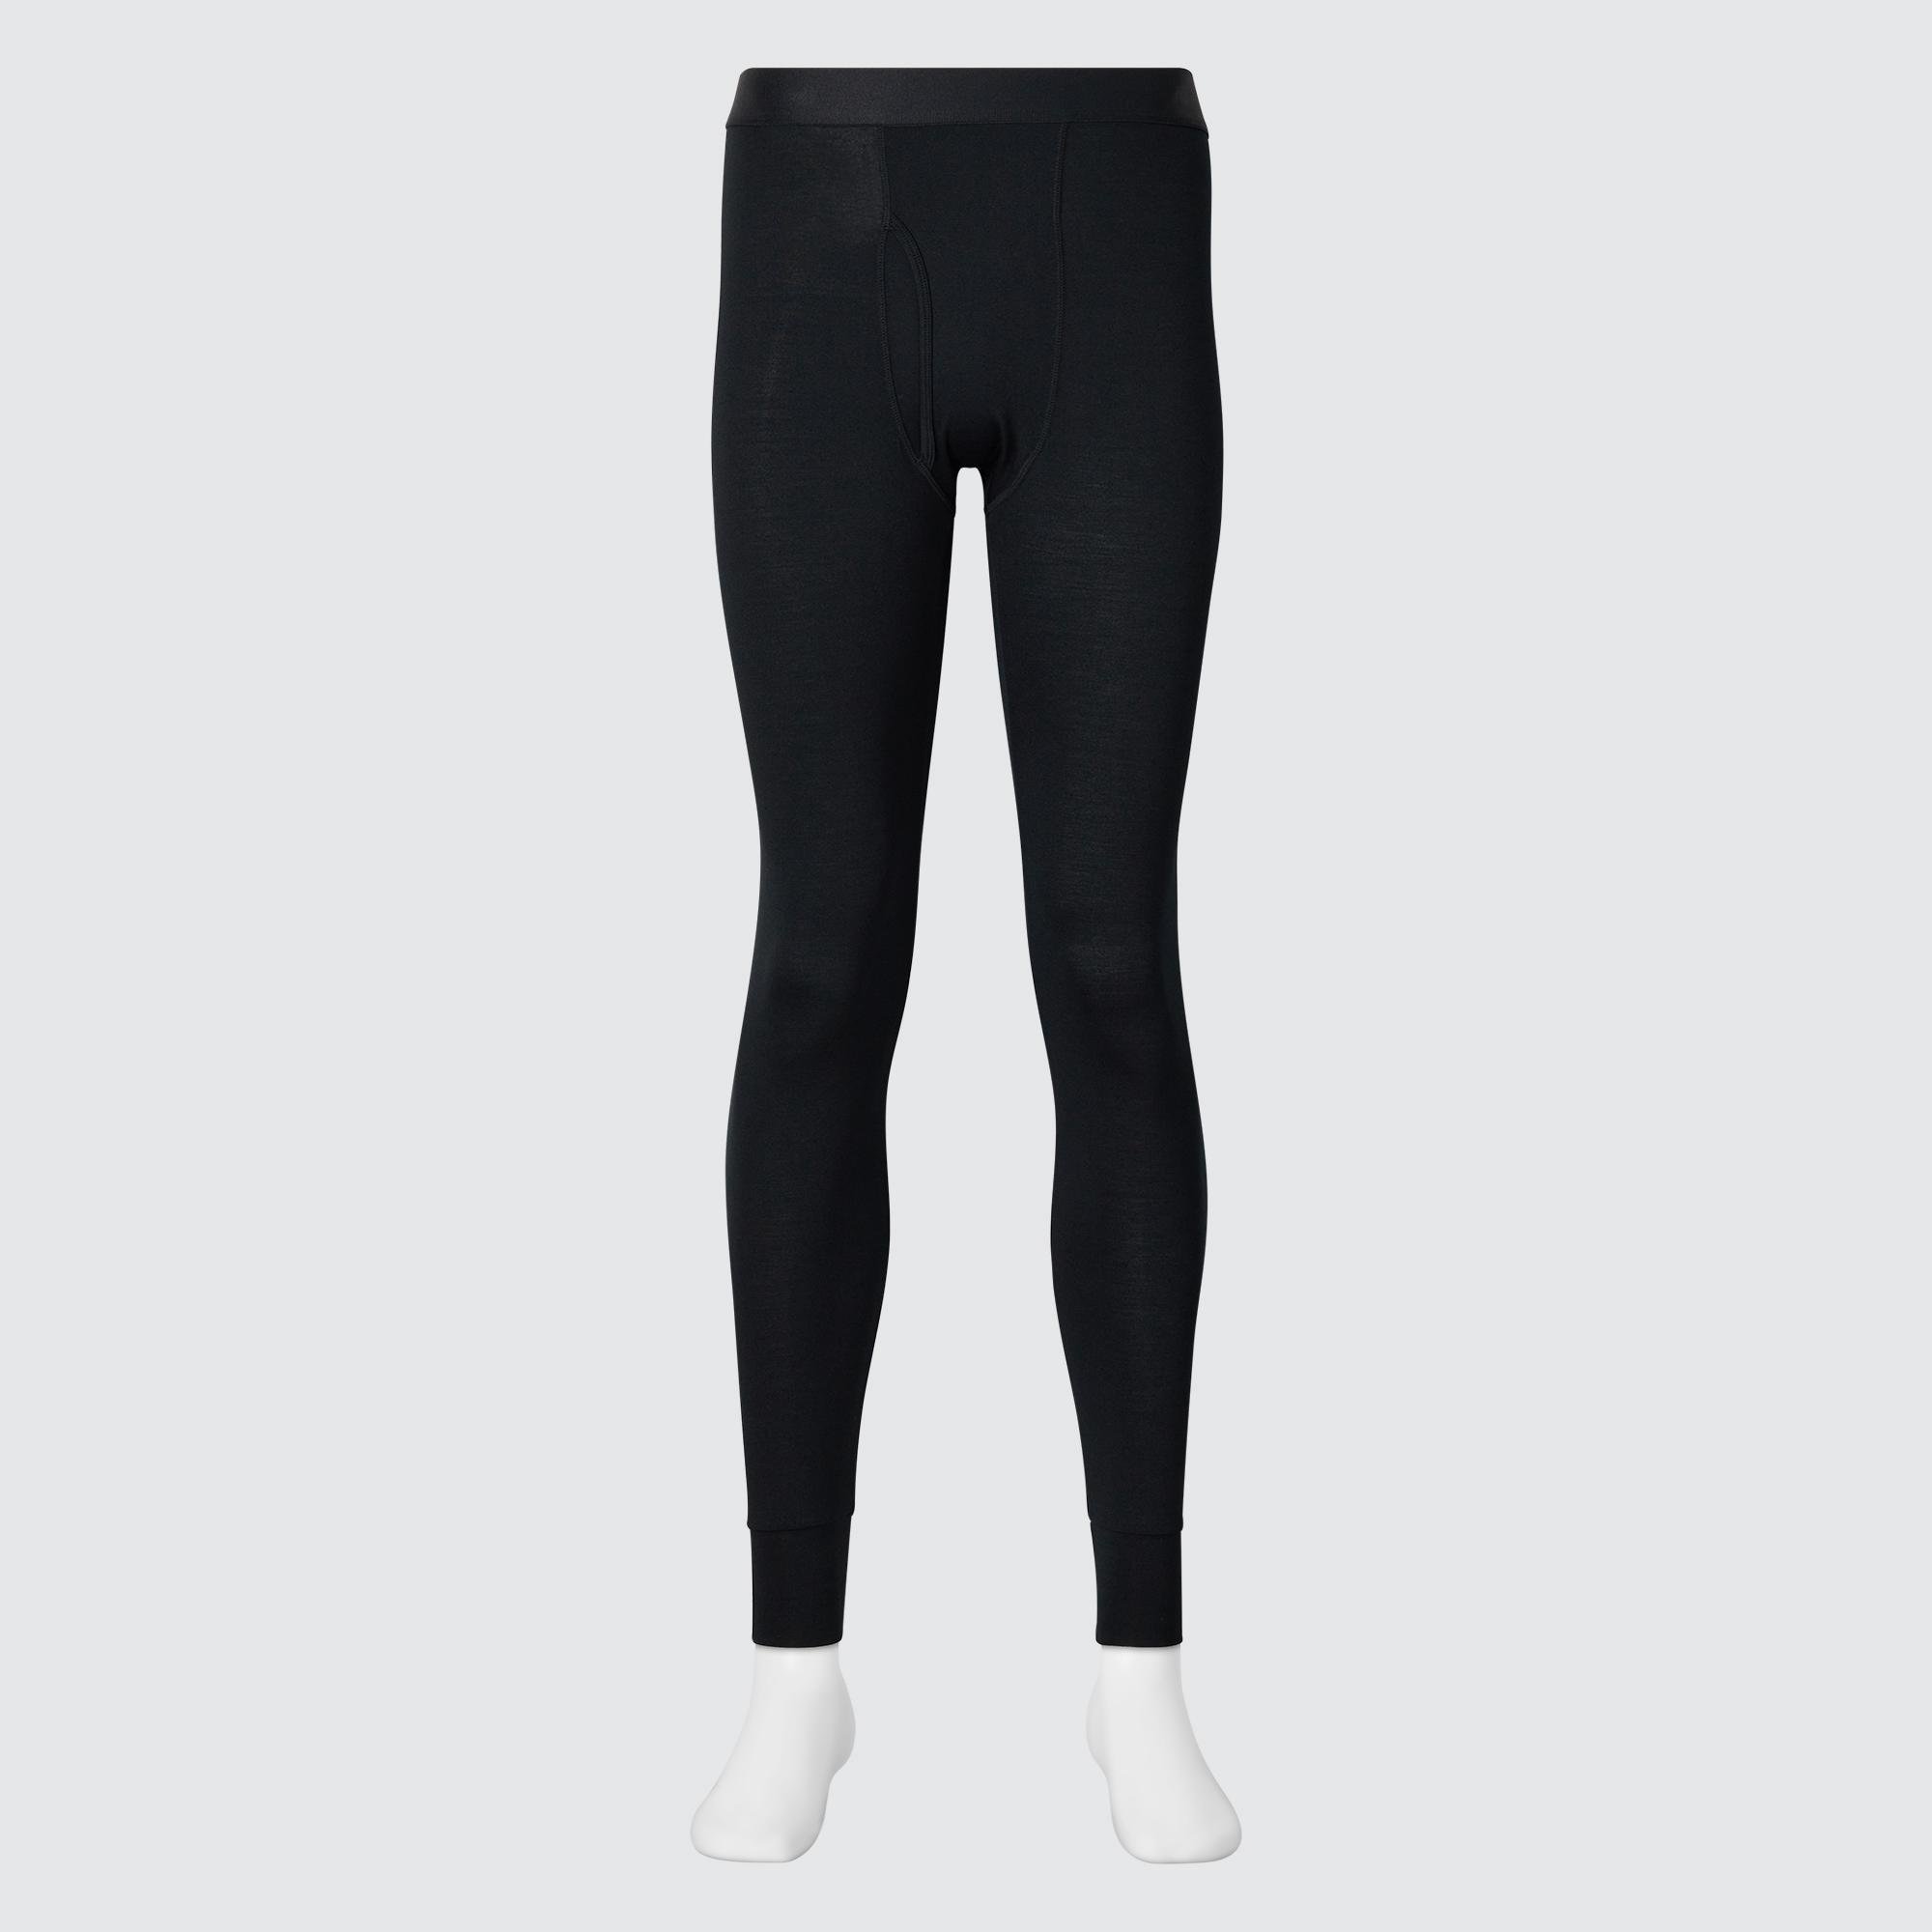 HEATTECH Tights (2021 Edition) by UNIQLO